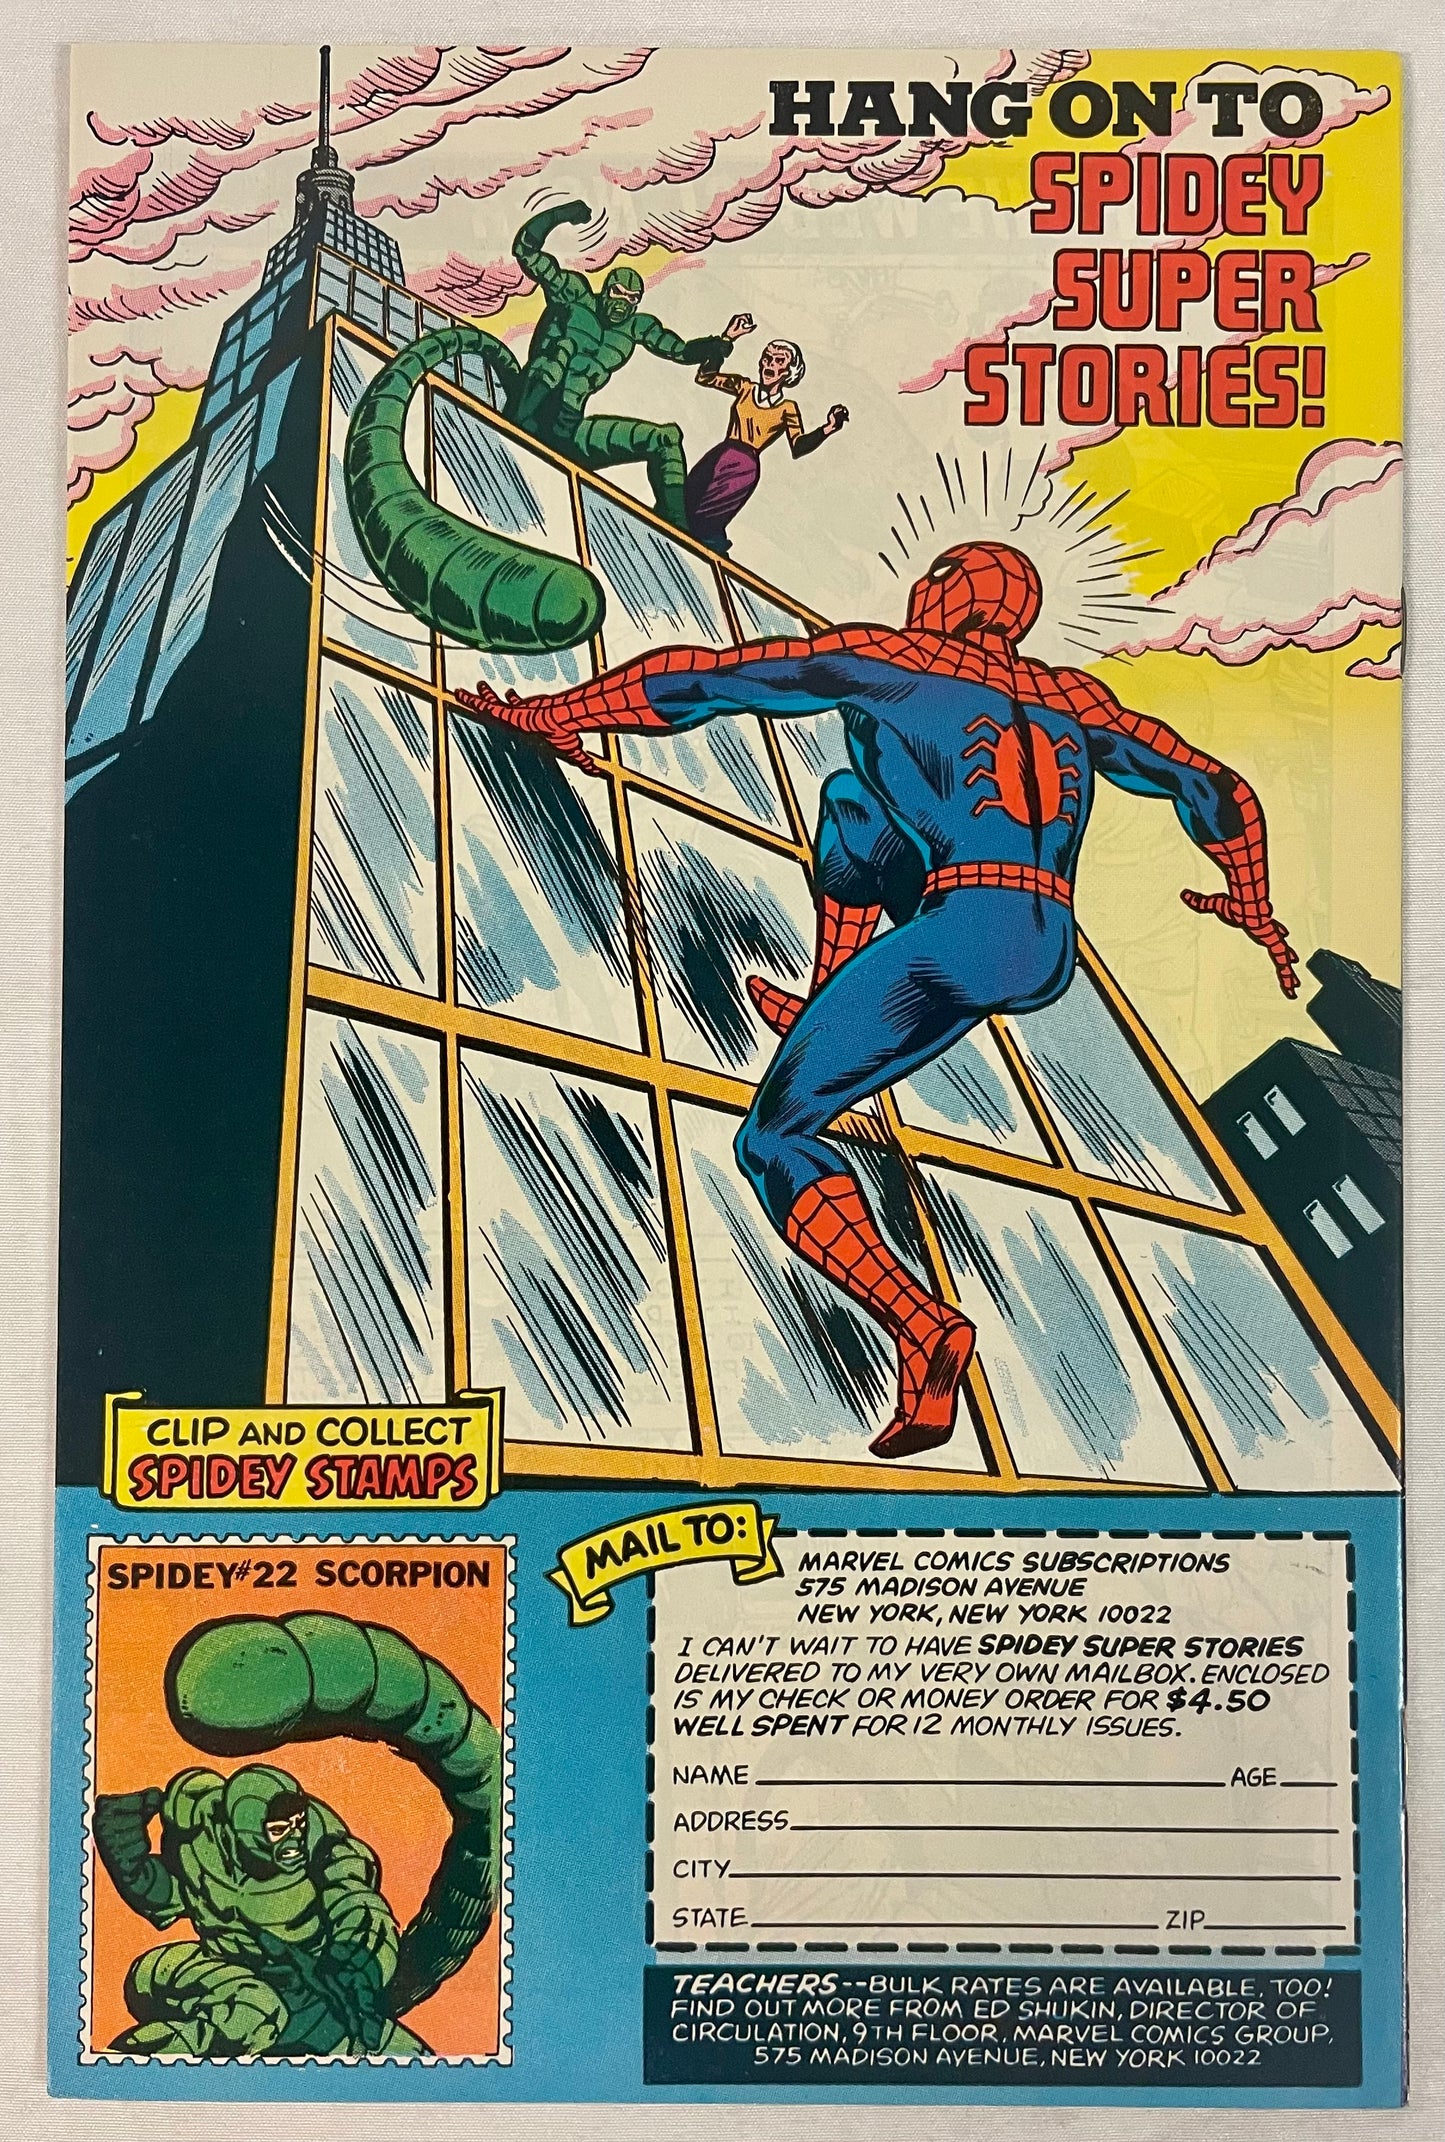 Marvel Comics And The Electric Company Presents Spidey Super Stories #38